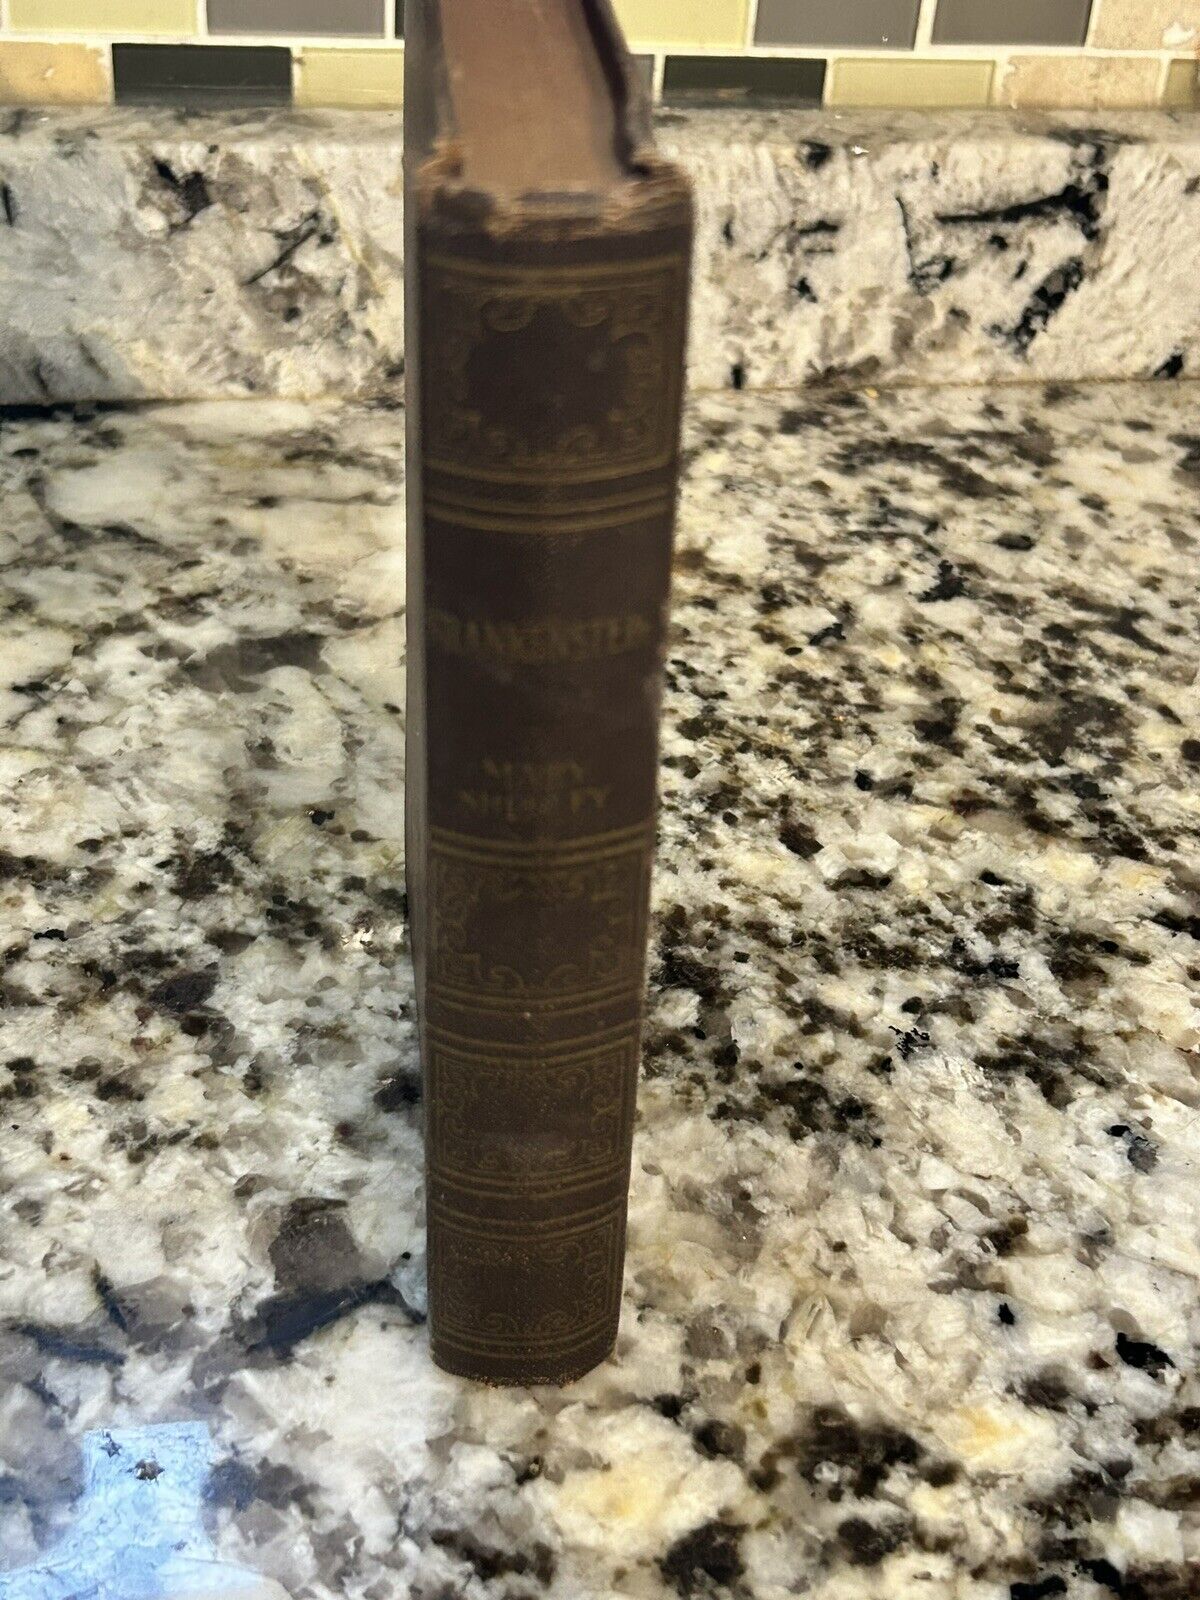 RARE ANTIQUE FRANKENSTEIN BOOK MARY SHELLEY ART TYPE EDITION CLASSIC 1930s